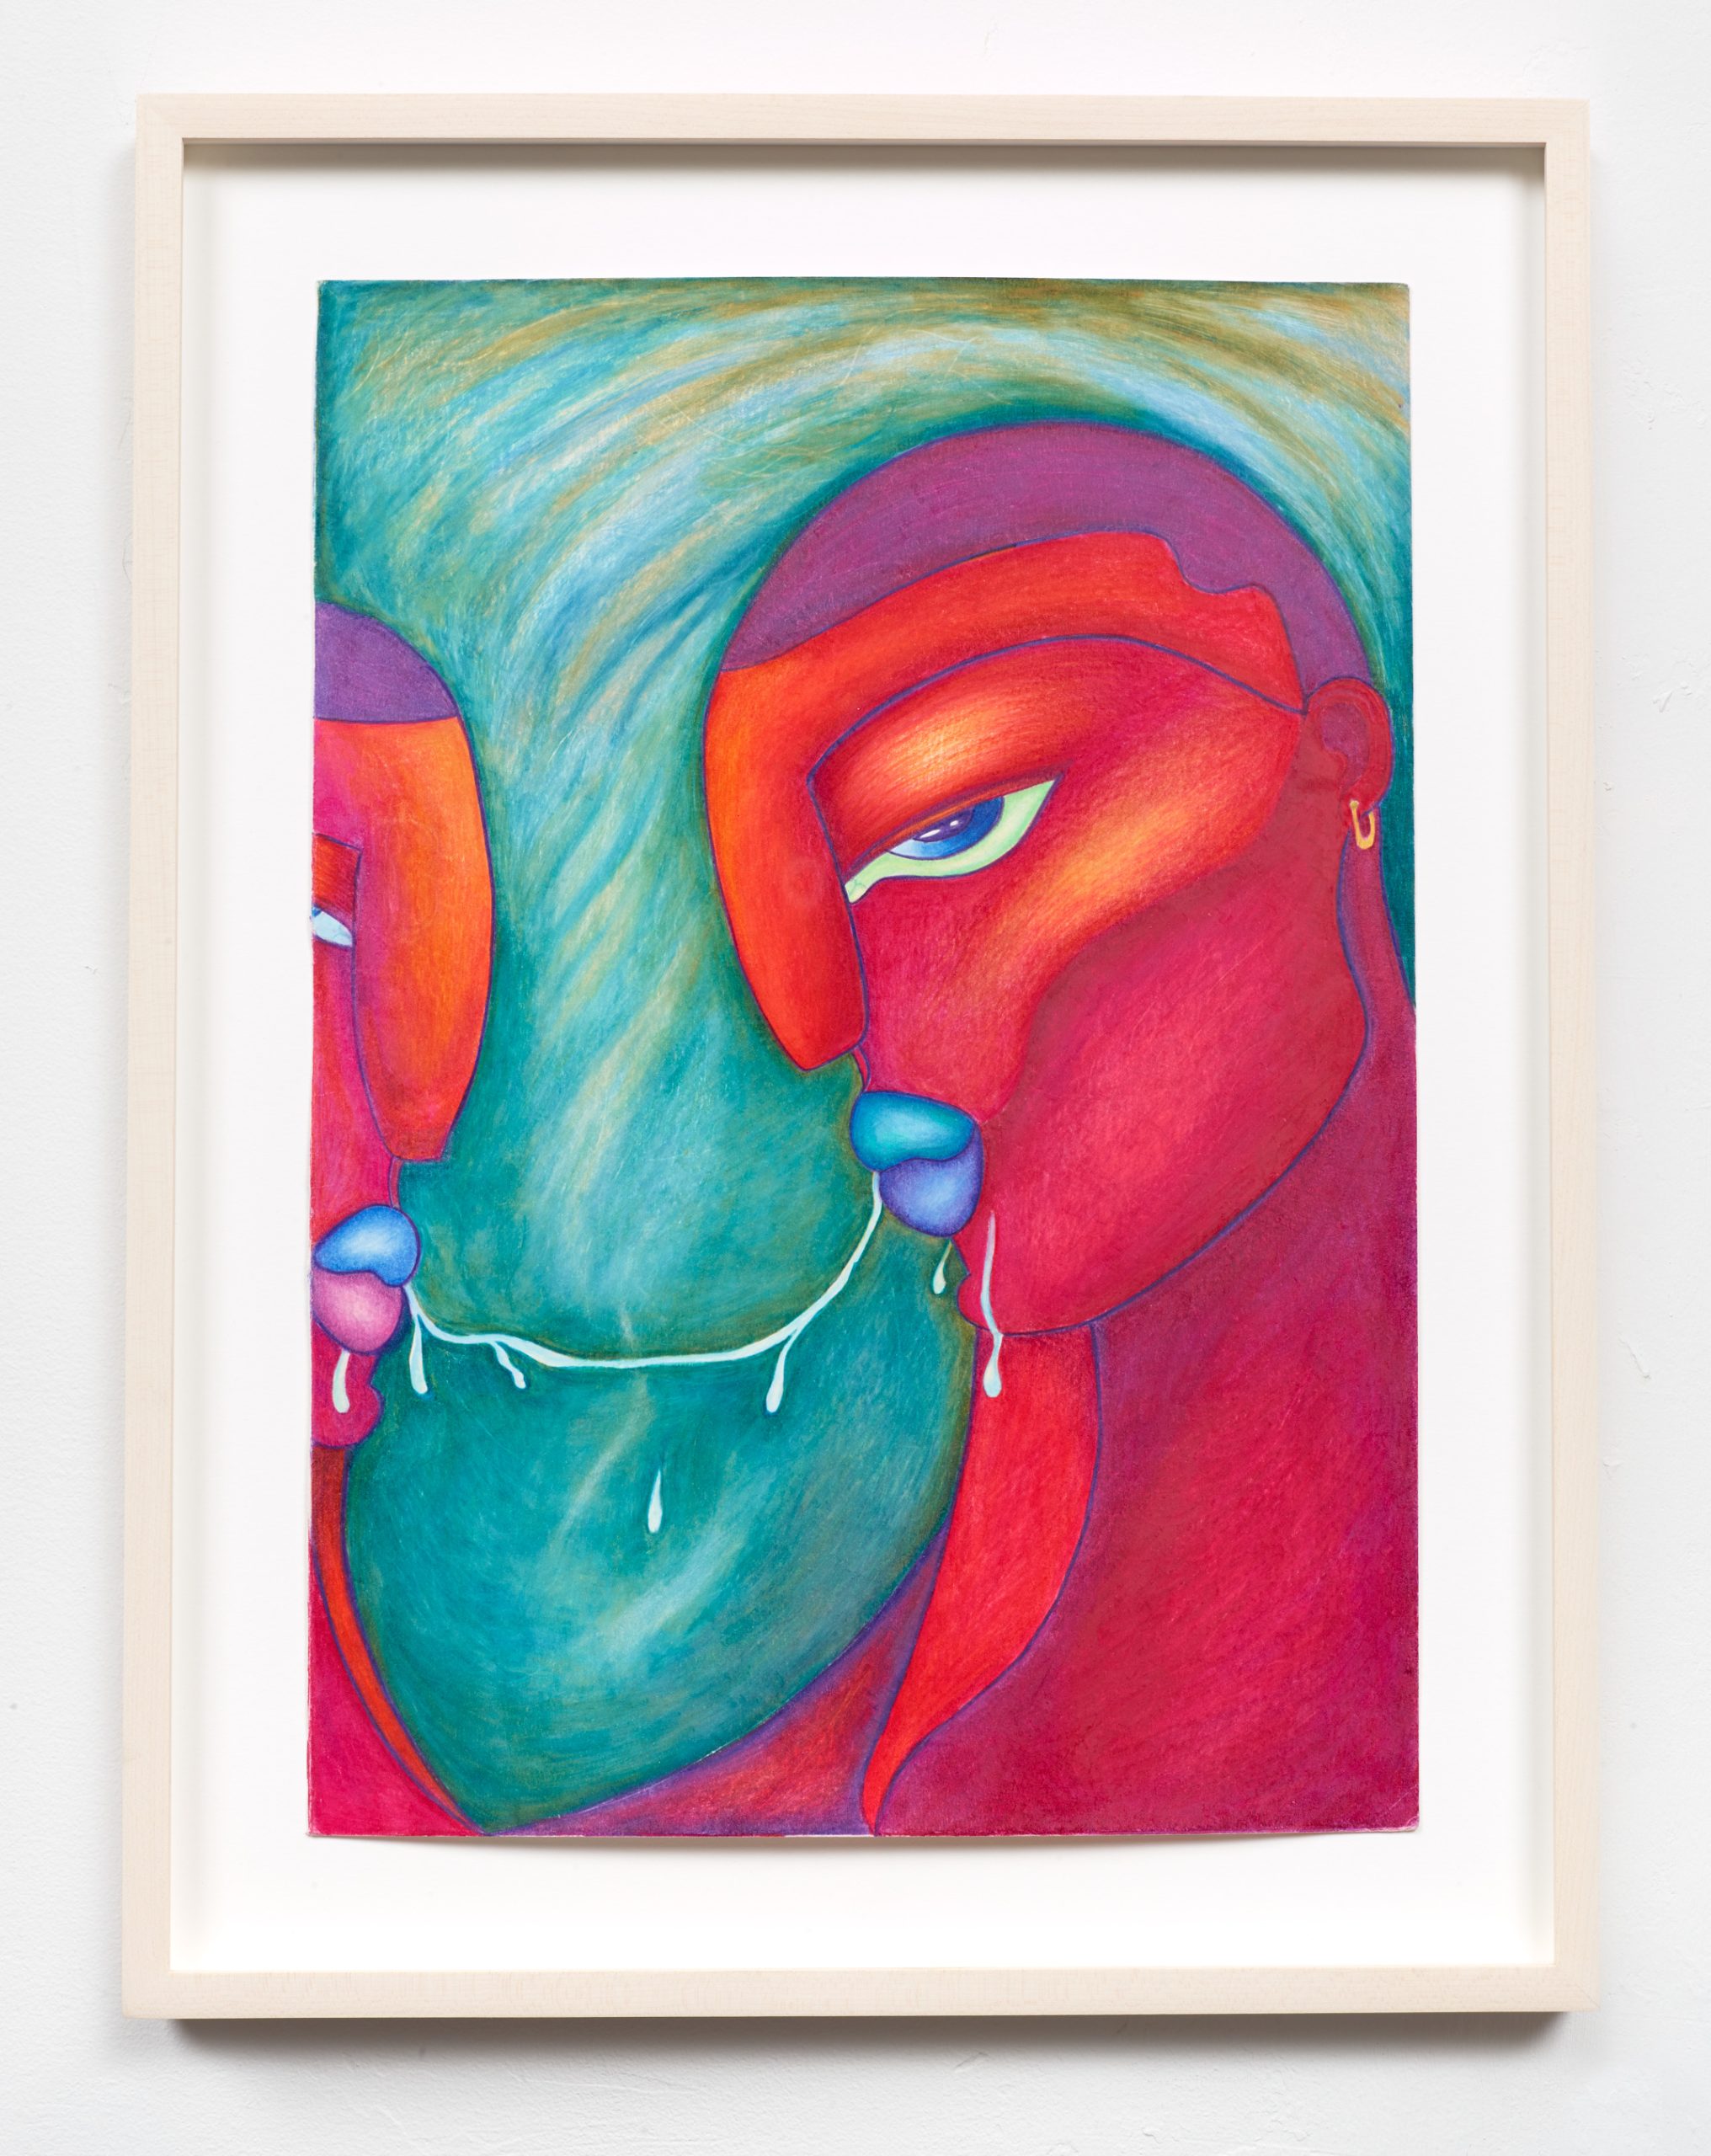 Face Time, 2021, Colored oil pencil on paper, 20.25 x 15.5 in (Framed)
Courtesy the artist and Kapp Kapp